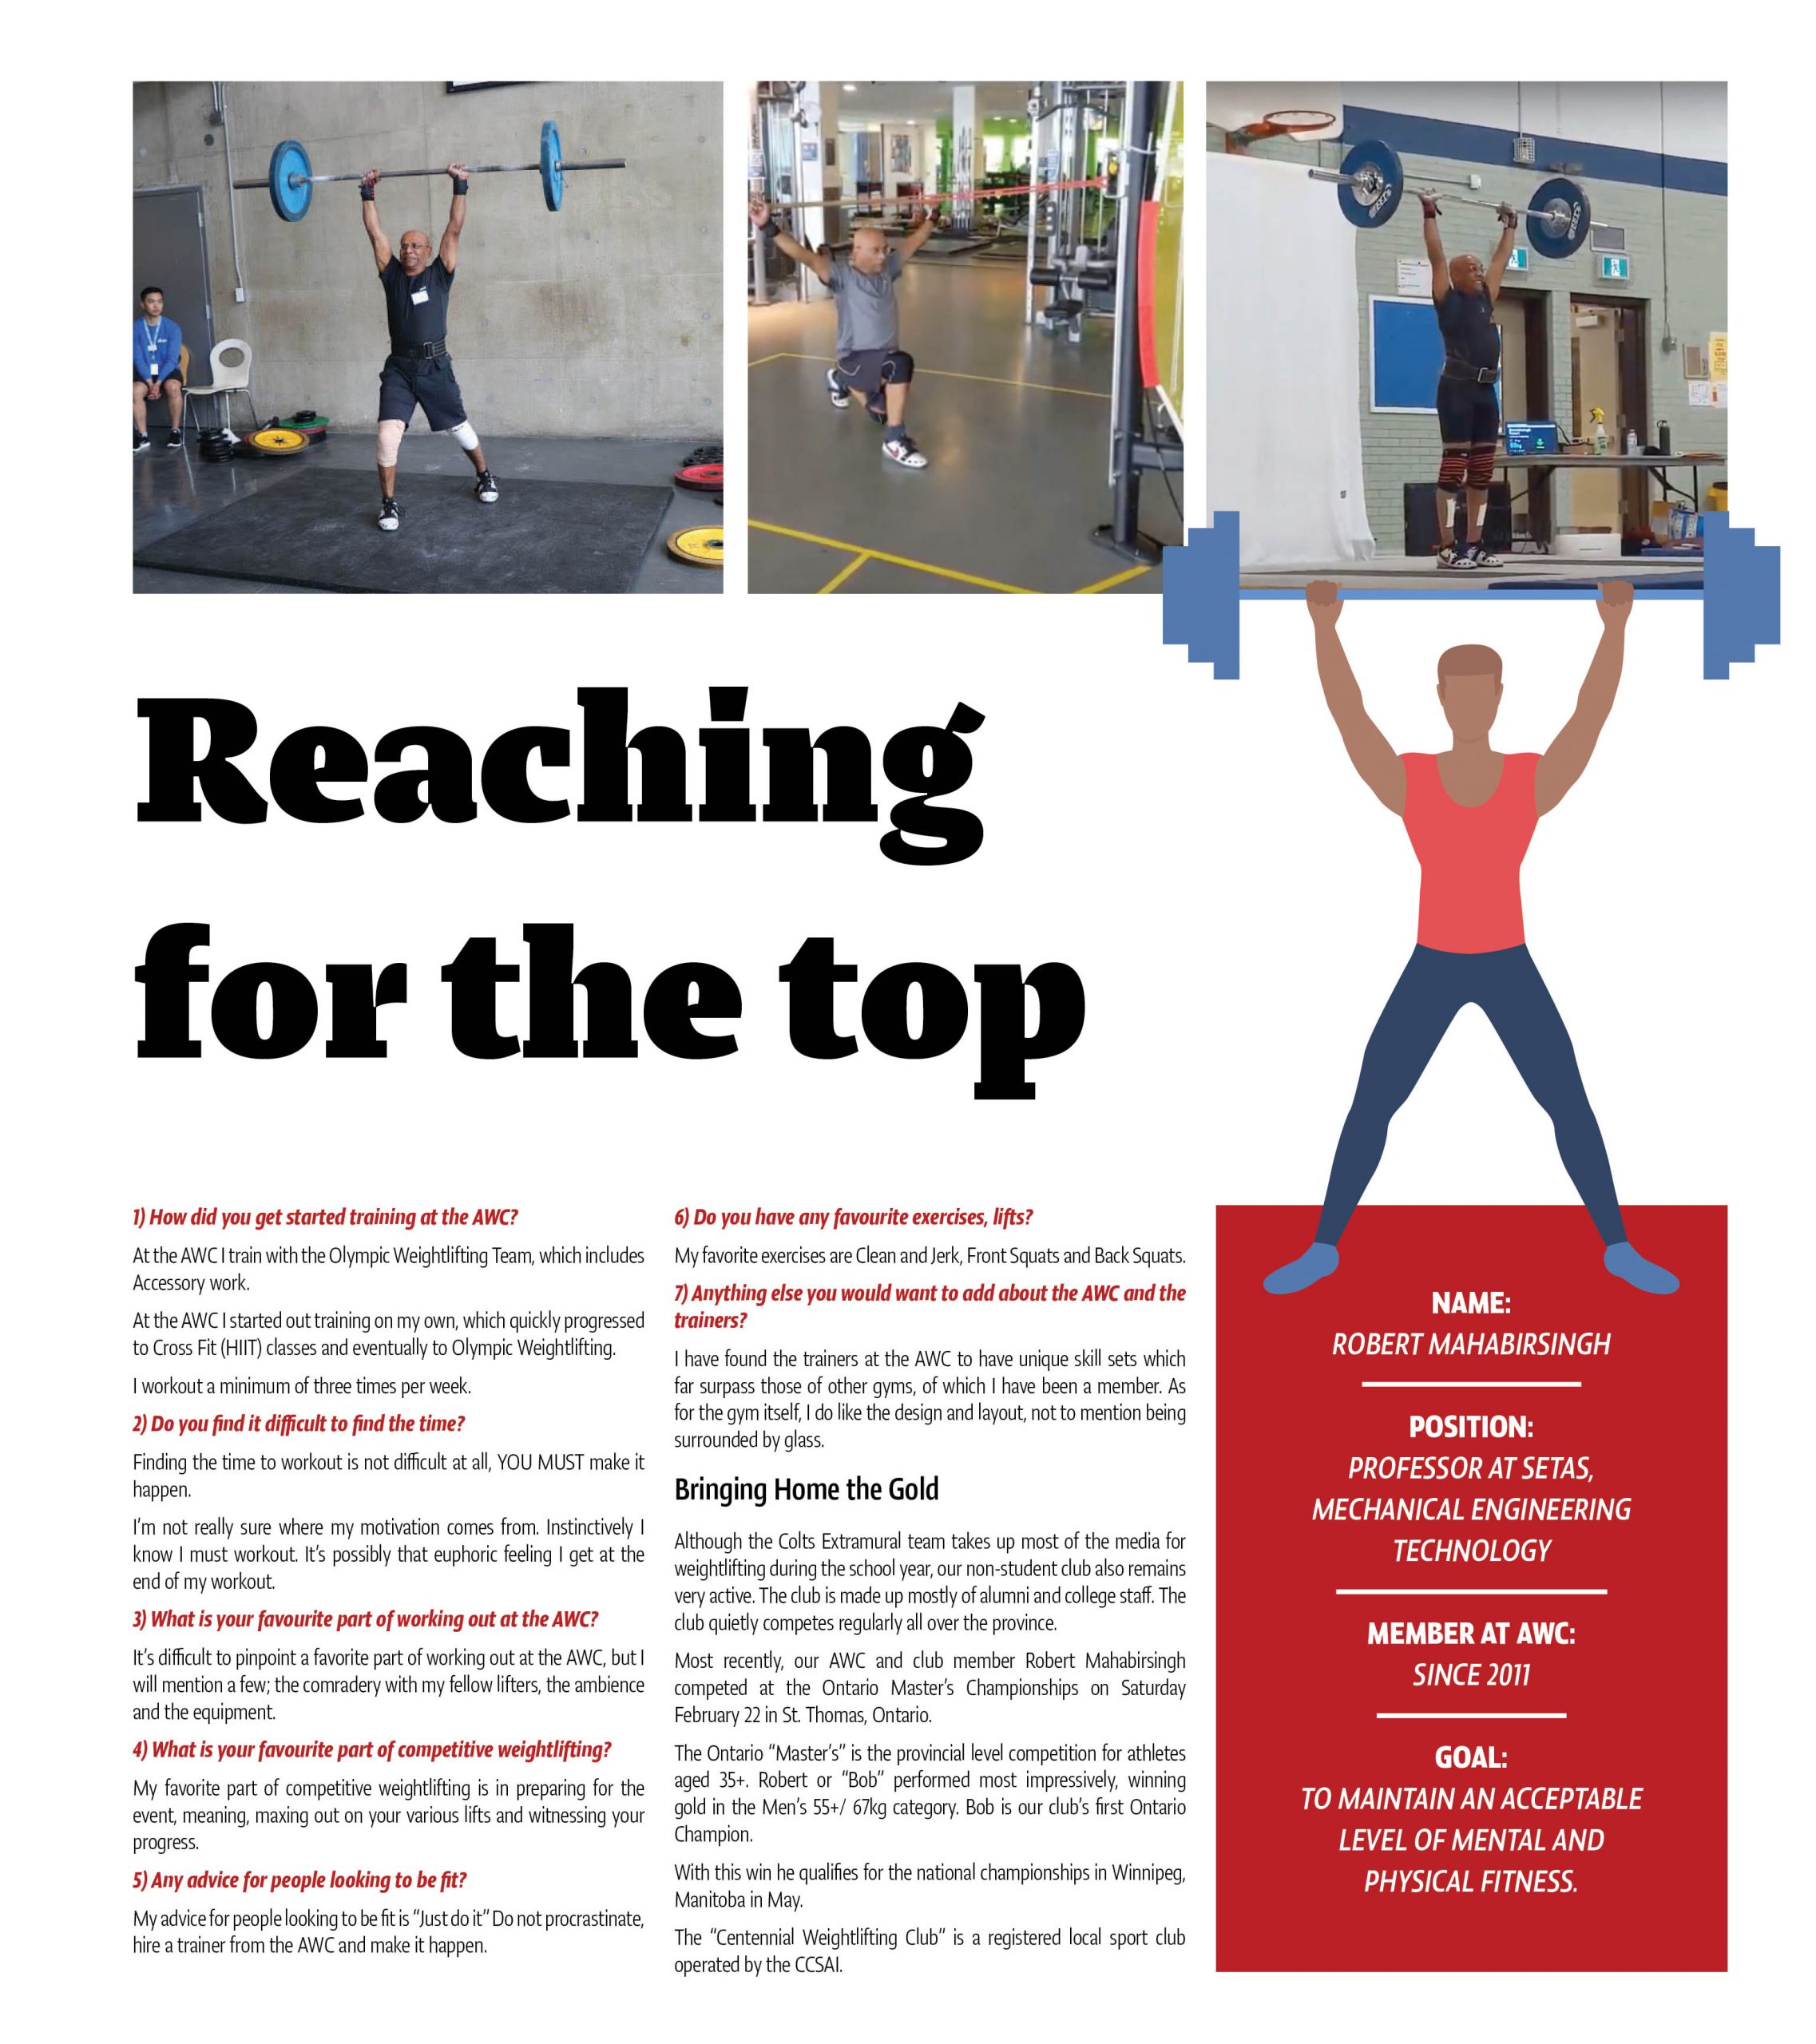 steps to reaching the top. 3 images of person working out